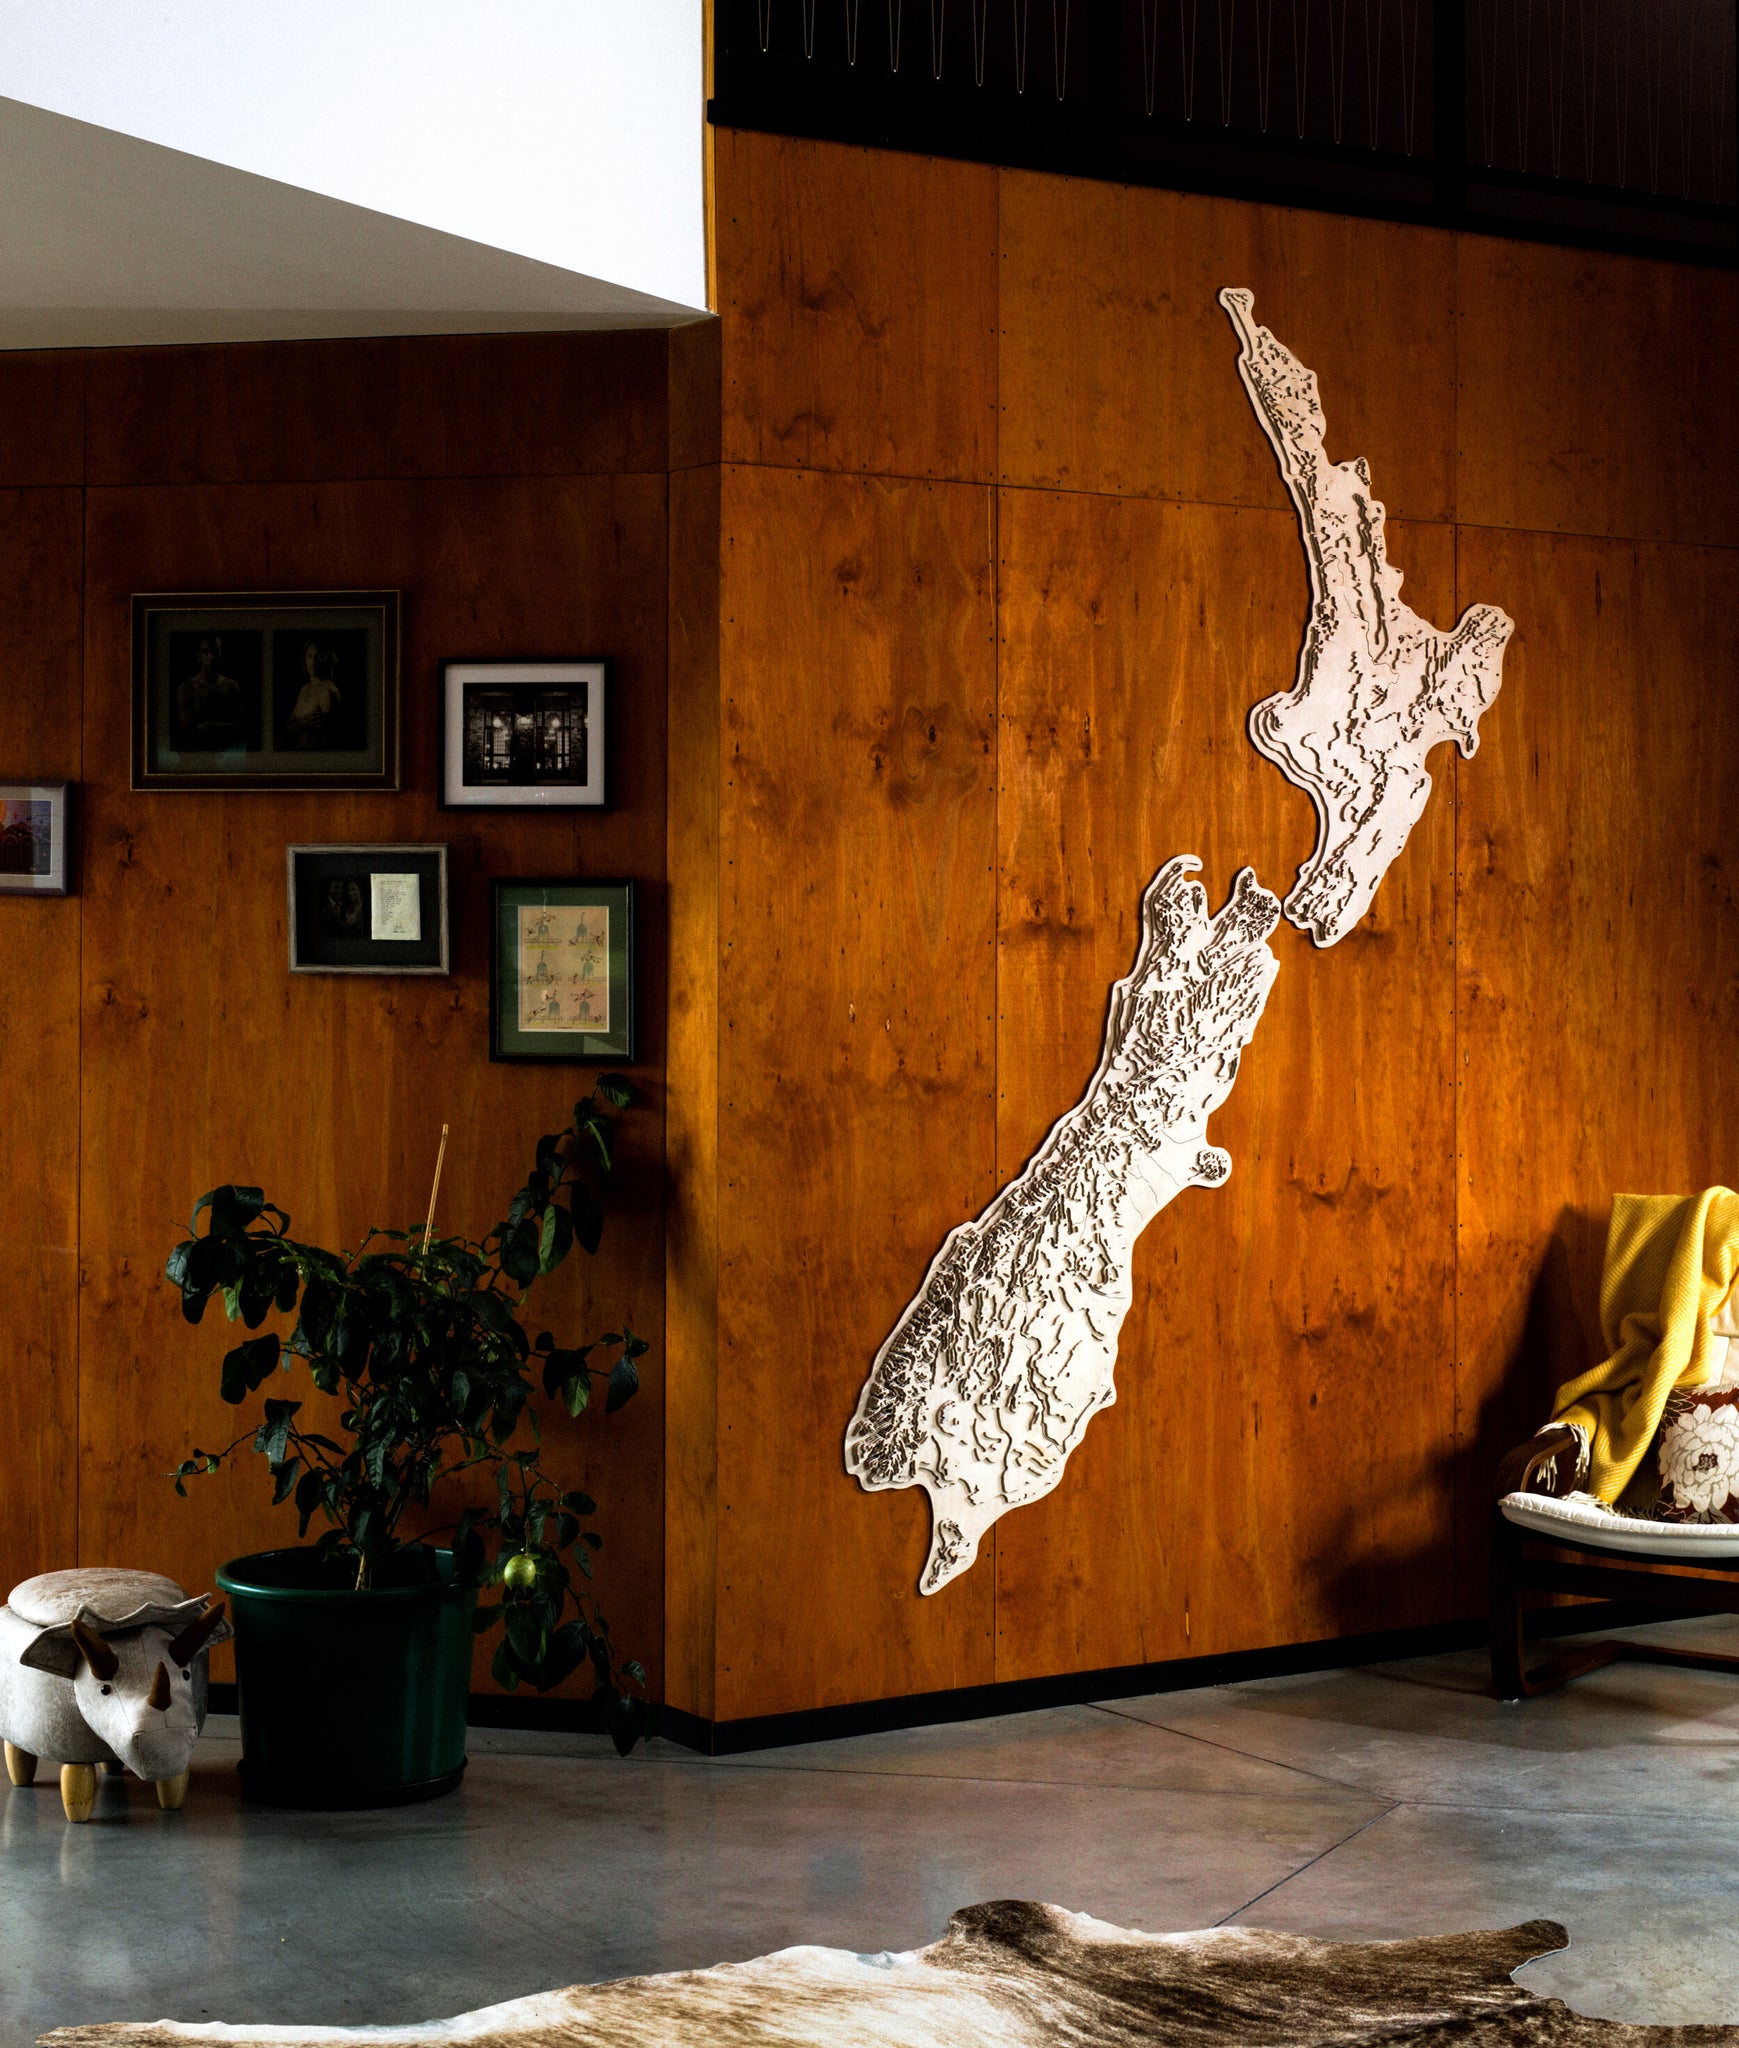 wooden topographic maps, wooden map of new zealand, wooden topo maps, layered topo maps wood, Nz topo maps, wooden map of new zealand, wood map, wood topo art, wooden artwork, wooden art, new zealand wooden map, map of new zealand, office artwork, new zealand office artwork, interior design, interior artwork, office fit out ideas 